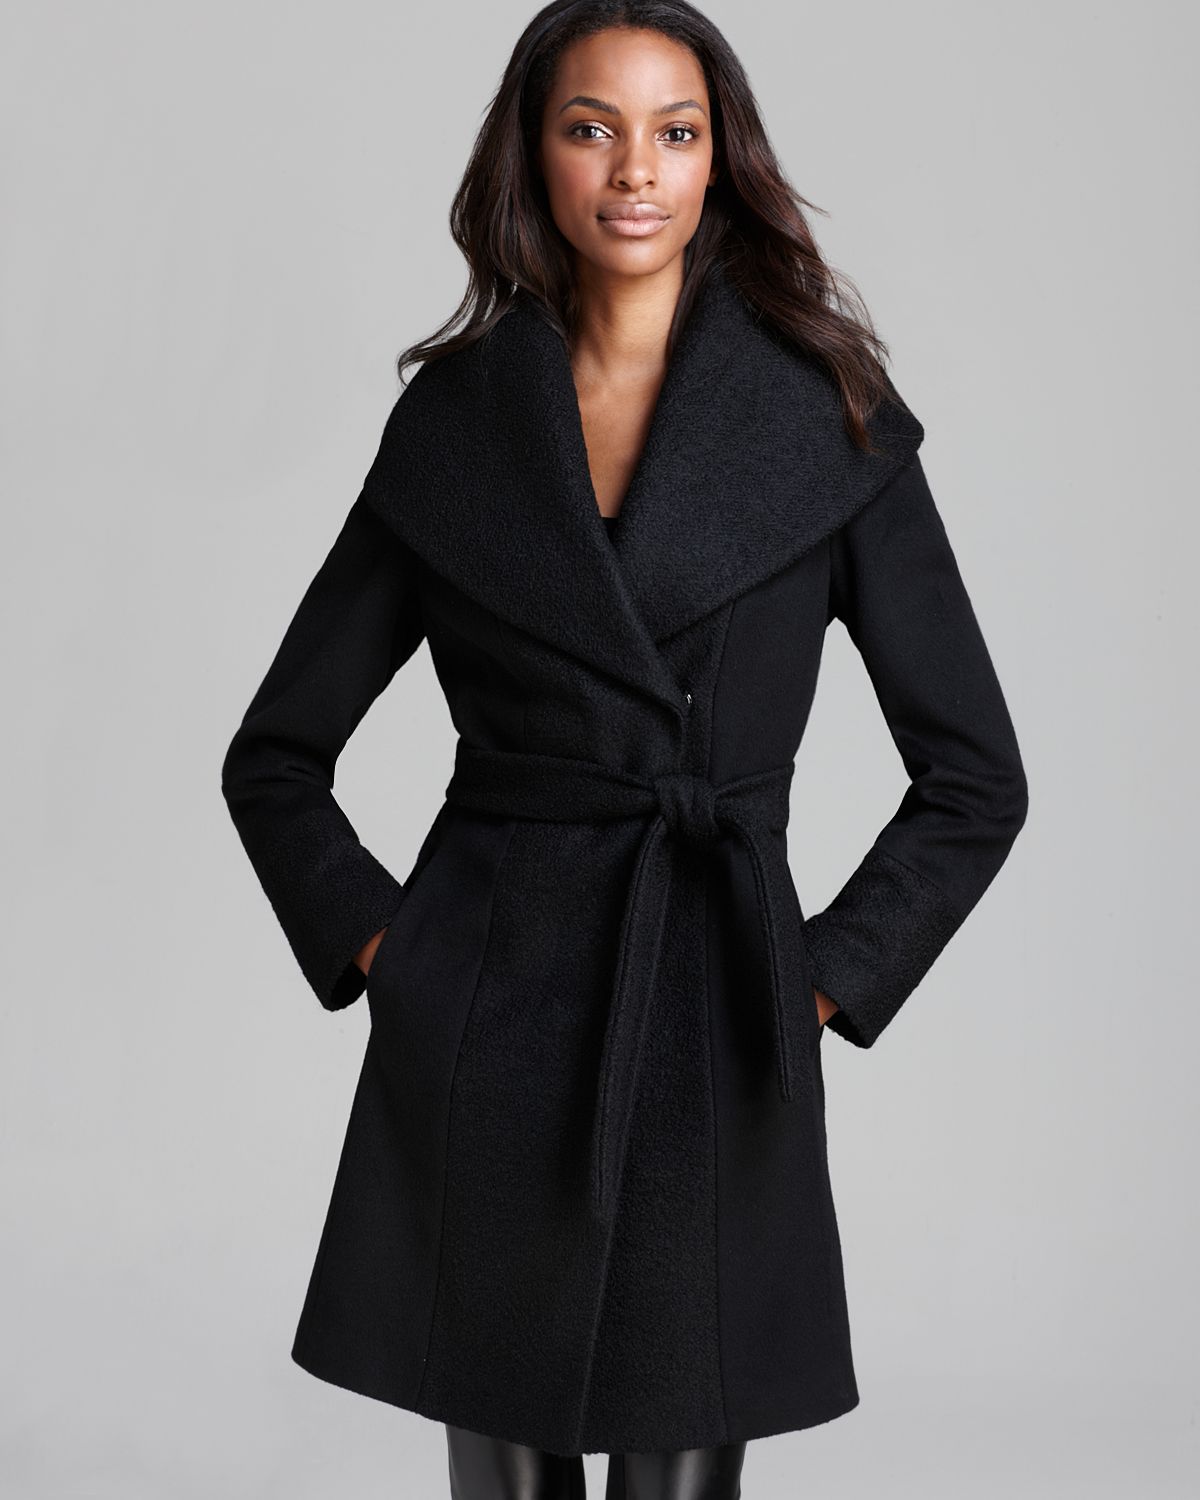 Why you should get black wool coat for women - StyleSkier.com